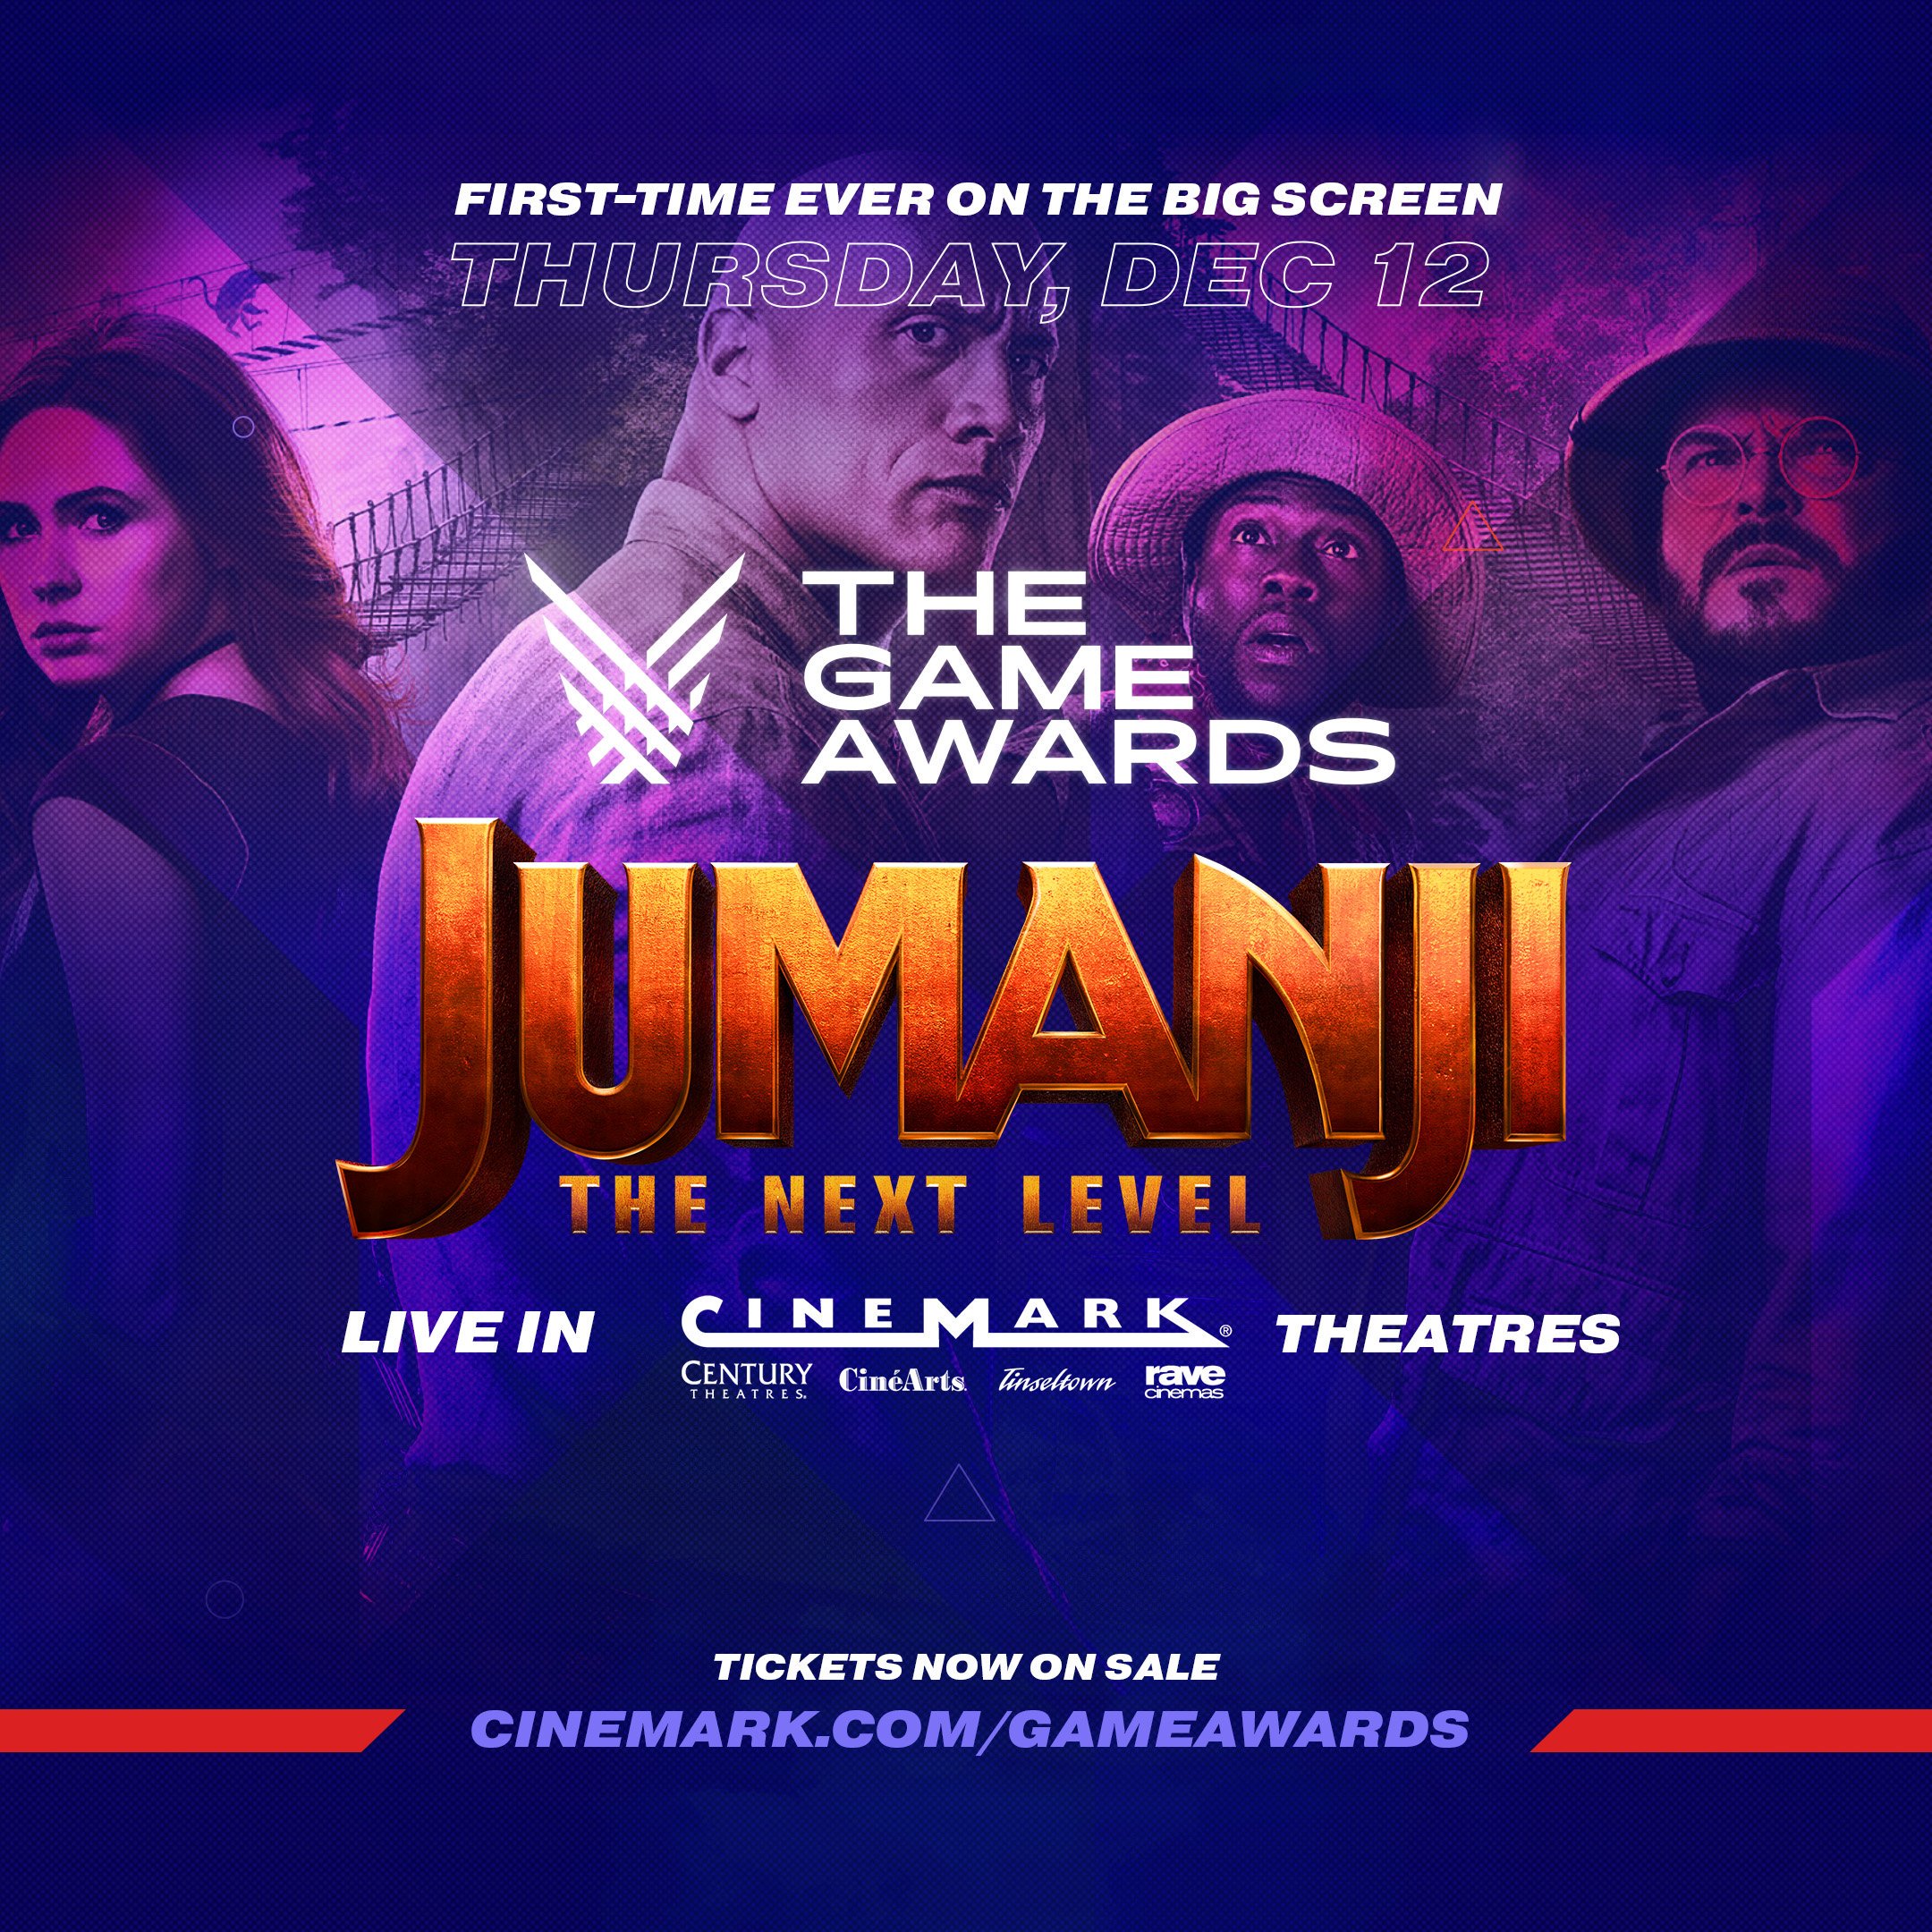 See The Game Awards Live In 53 Movie Theaters News The Game Awards